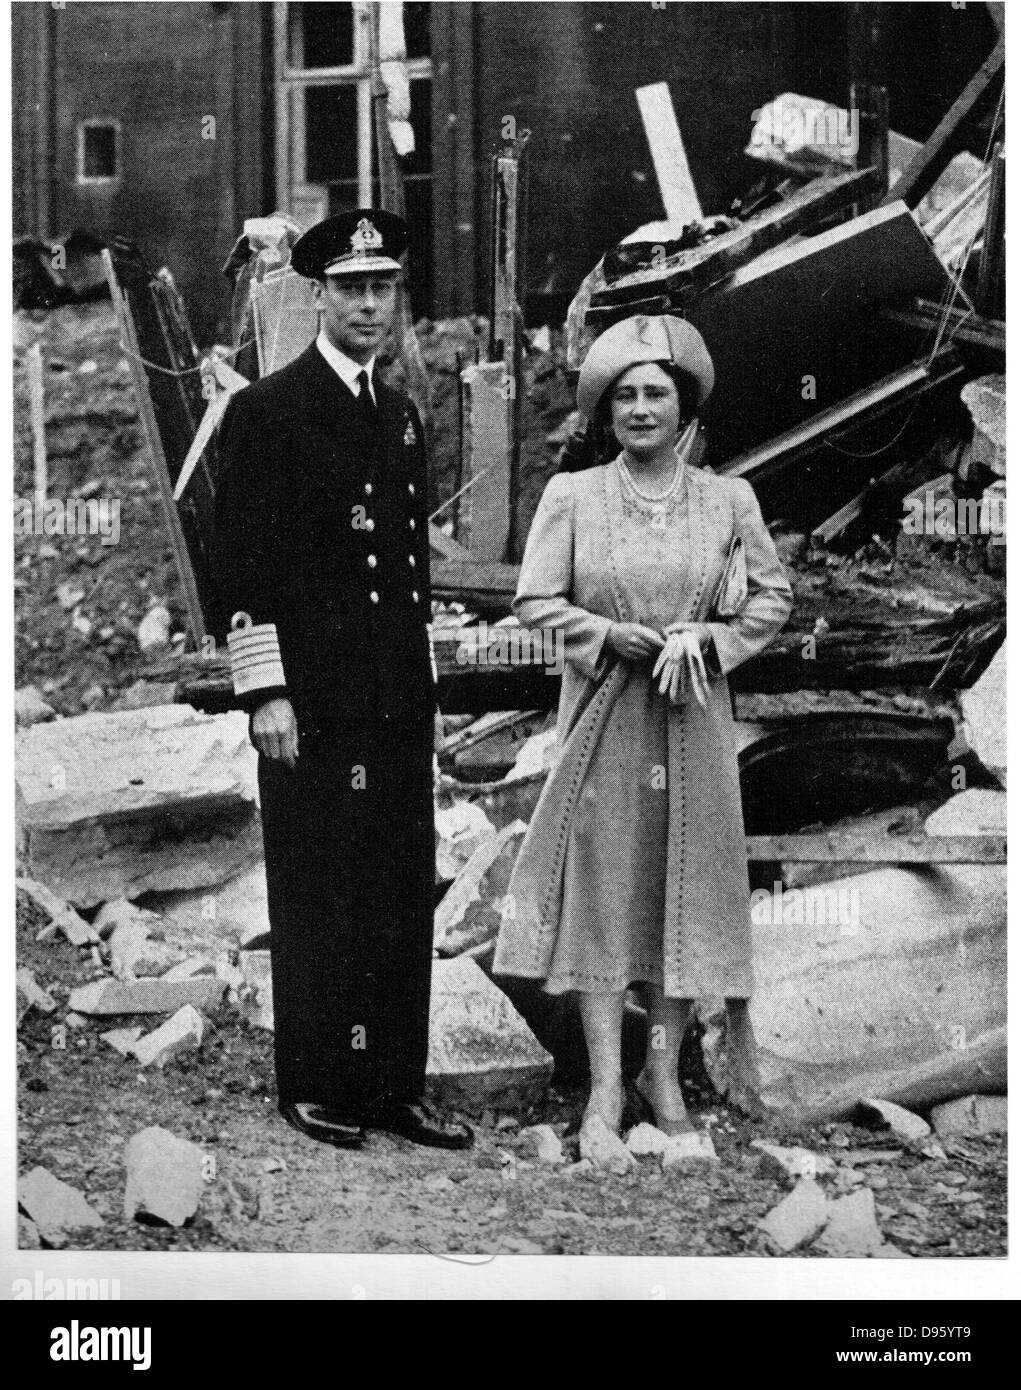 George VI (1895-1952) and Queen Elizabeth (1900-2002) standing among the bomb damage at Buckingham Palace, London.  During the Blitz, the German bombing of London in World War II, between 7 September 1940 and 10 May 1941 the Palace was bombed seven times. Stock Photo